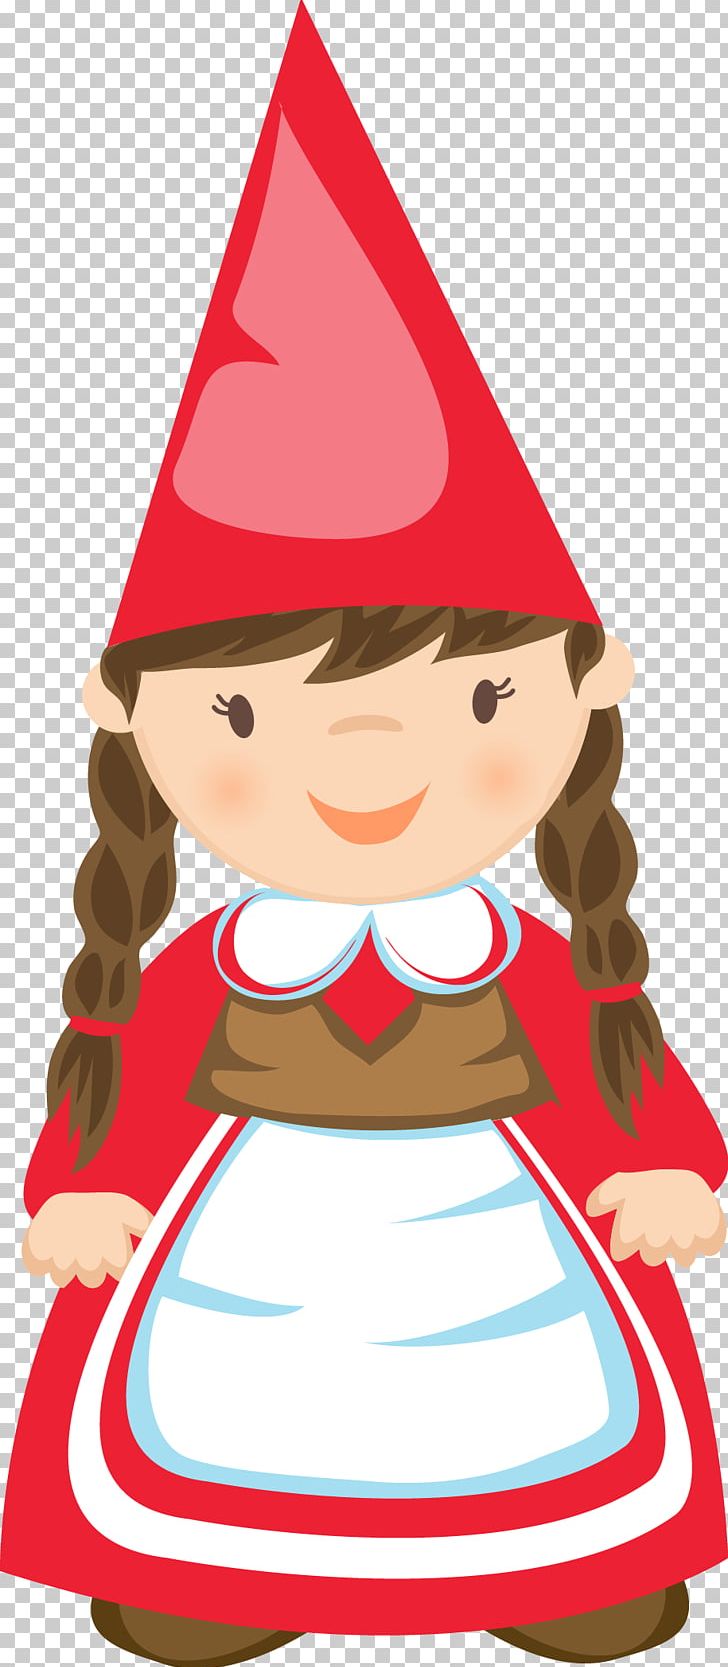 Garden Gnome PNG, Clipart, Art, Artwork, Cartoon, Christmas, Christmas Decoration Free PNG Download